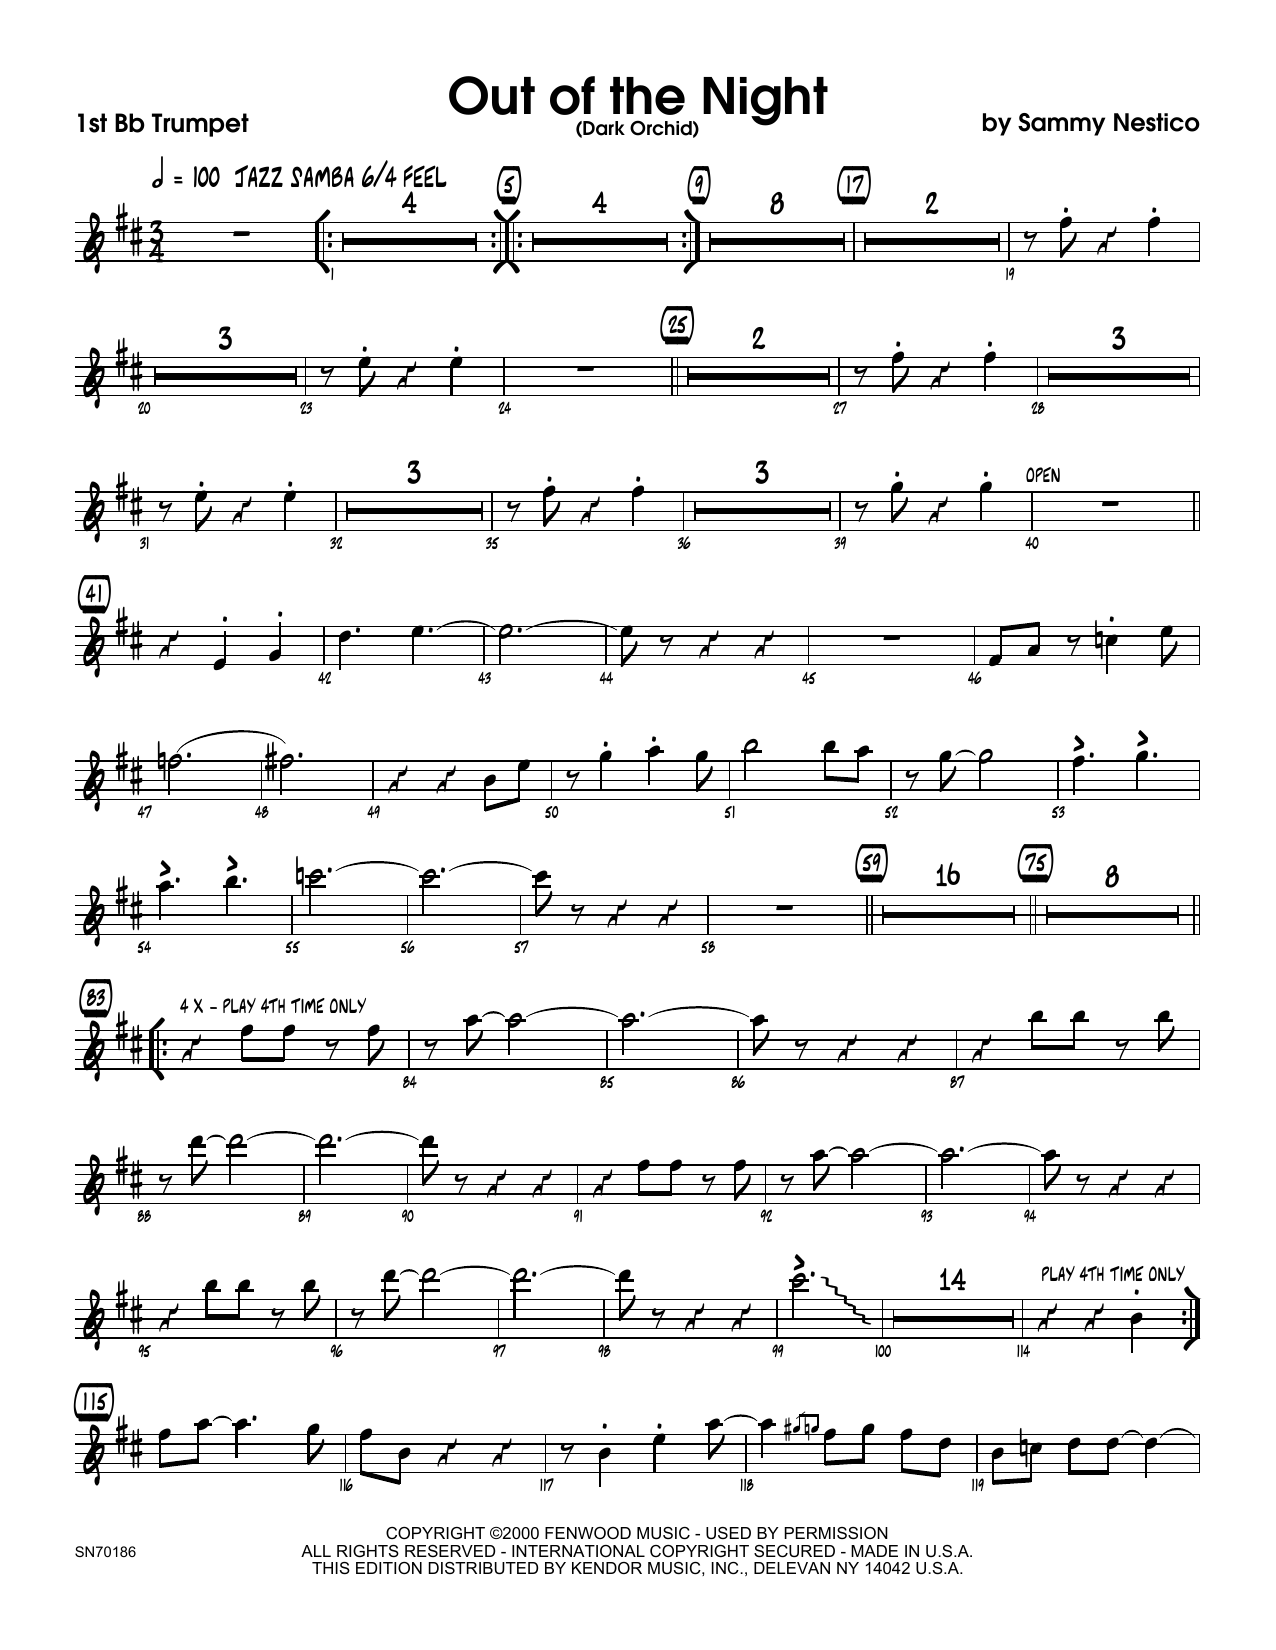 Download Sammy Nestico Out of the Night - 1st Bb Trumpet Sheet Music